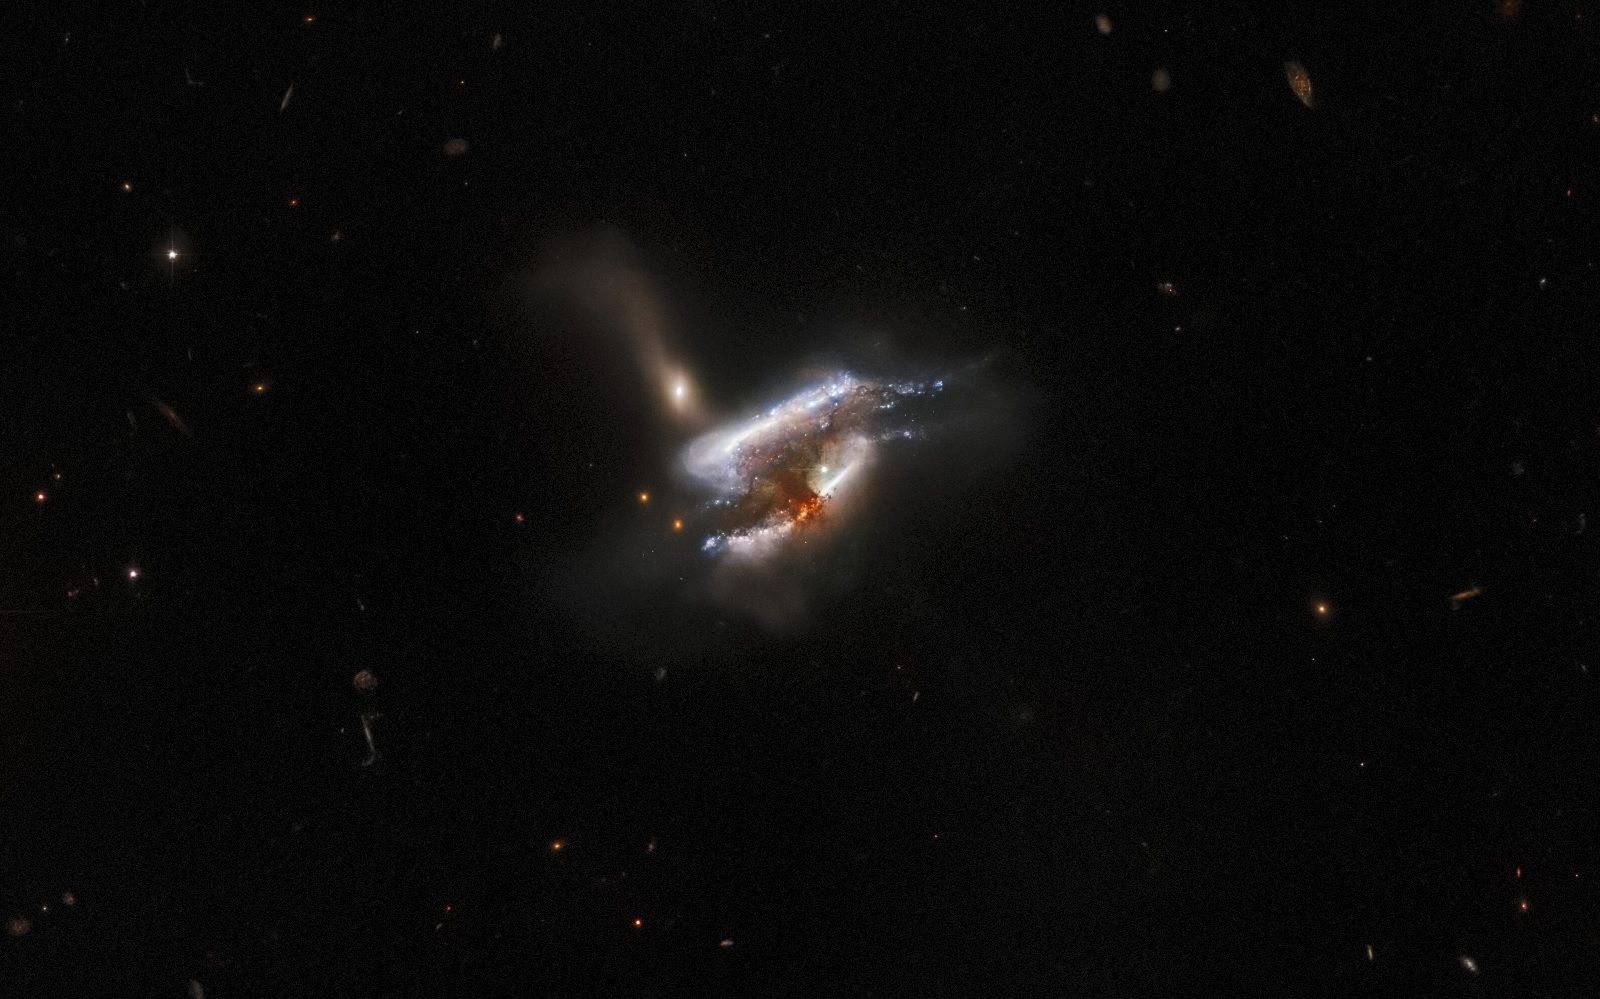 astounding images from the depths of the universe courtesy of the hubble space telescope photo 45